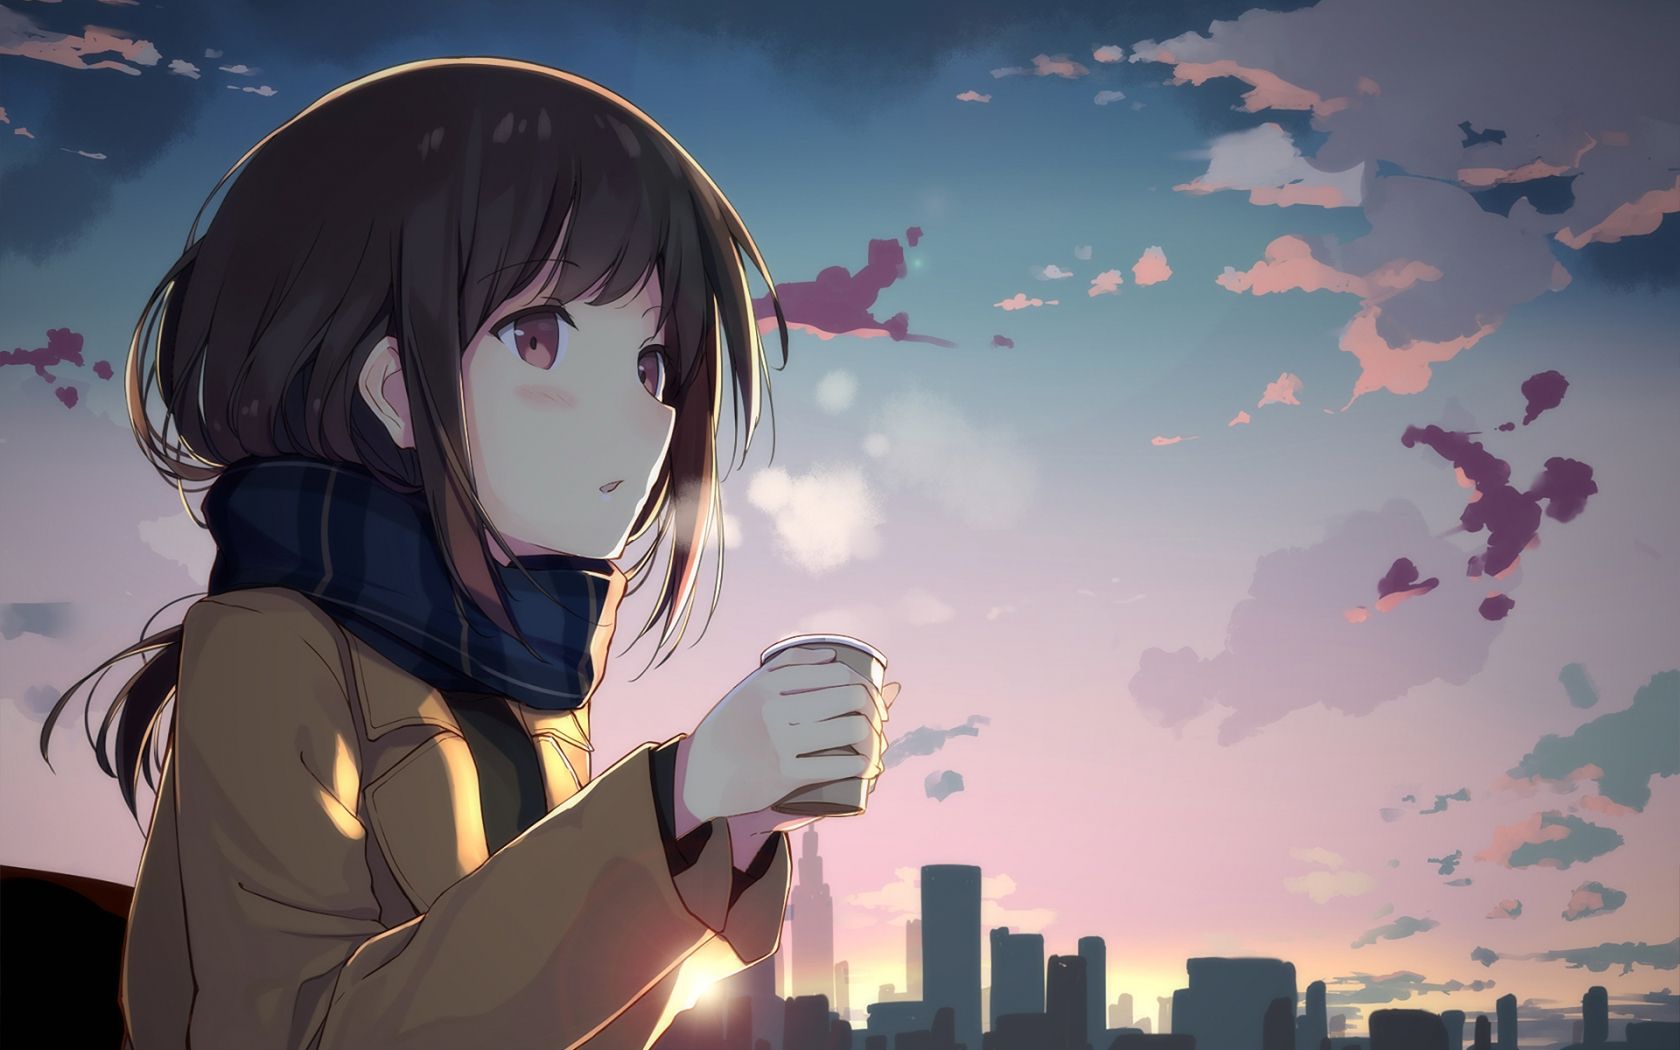 Download Cute Profile Anime Girl Drinking Coffee Pictures